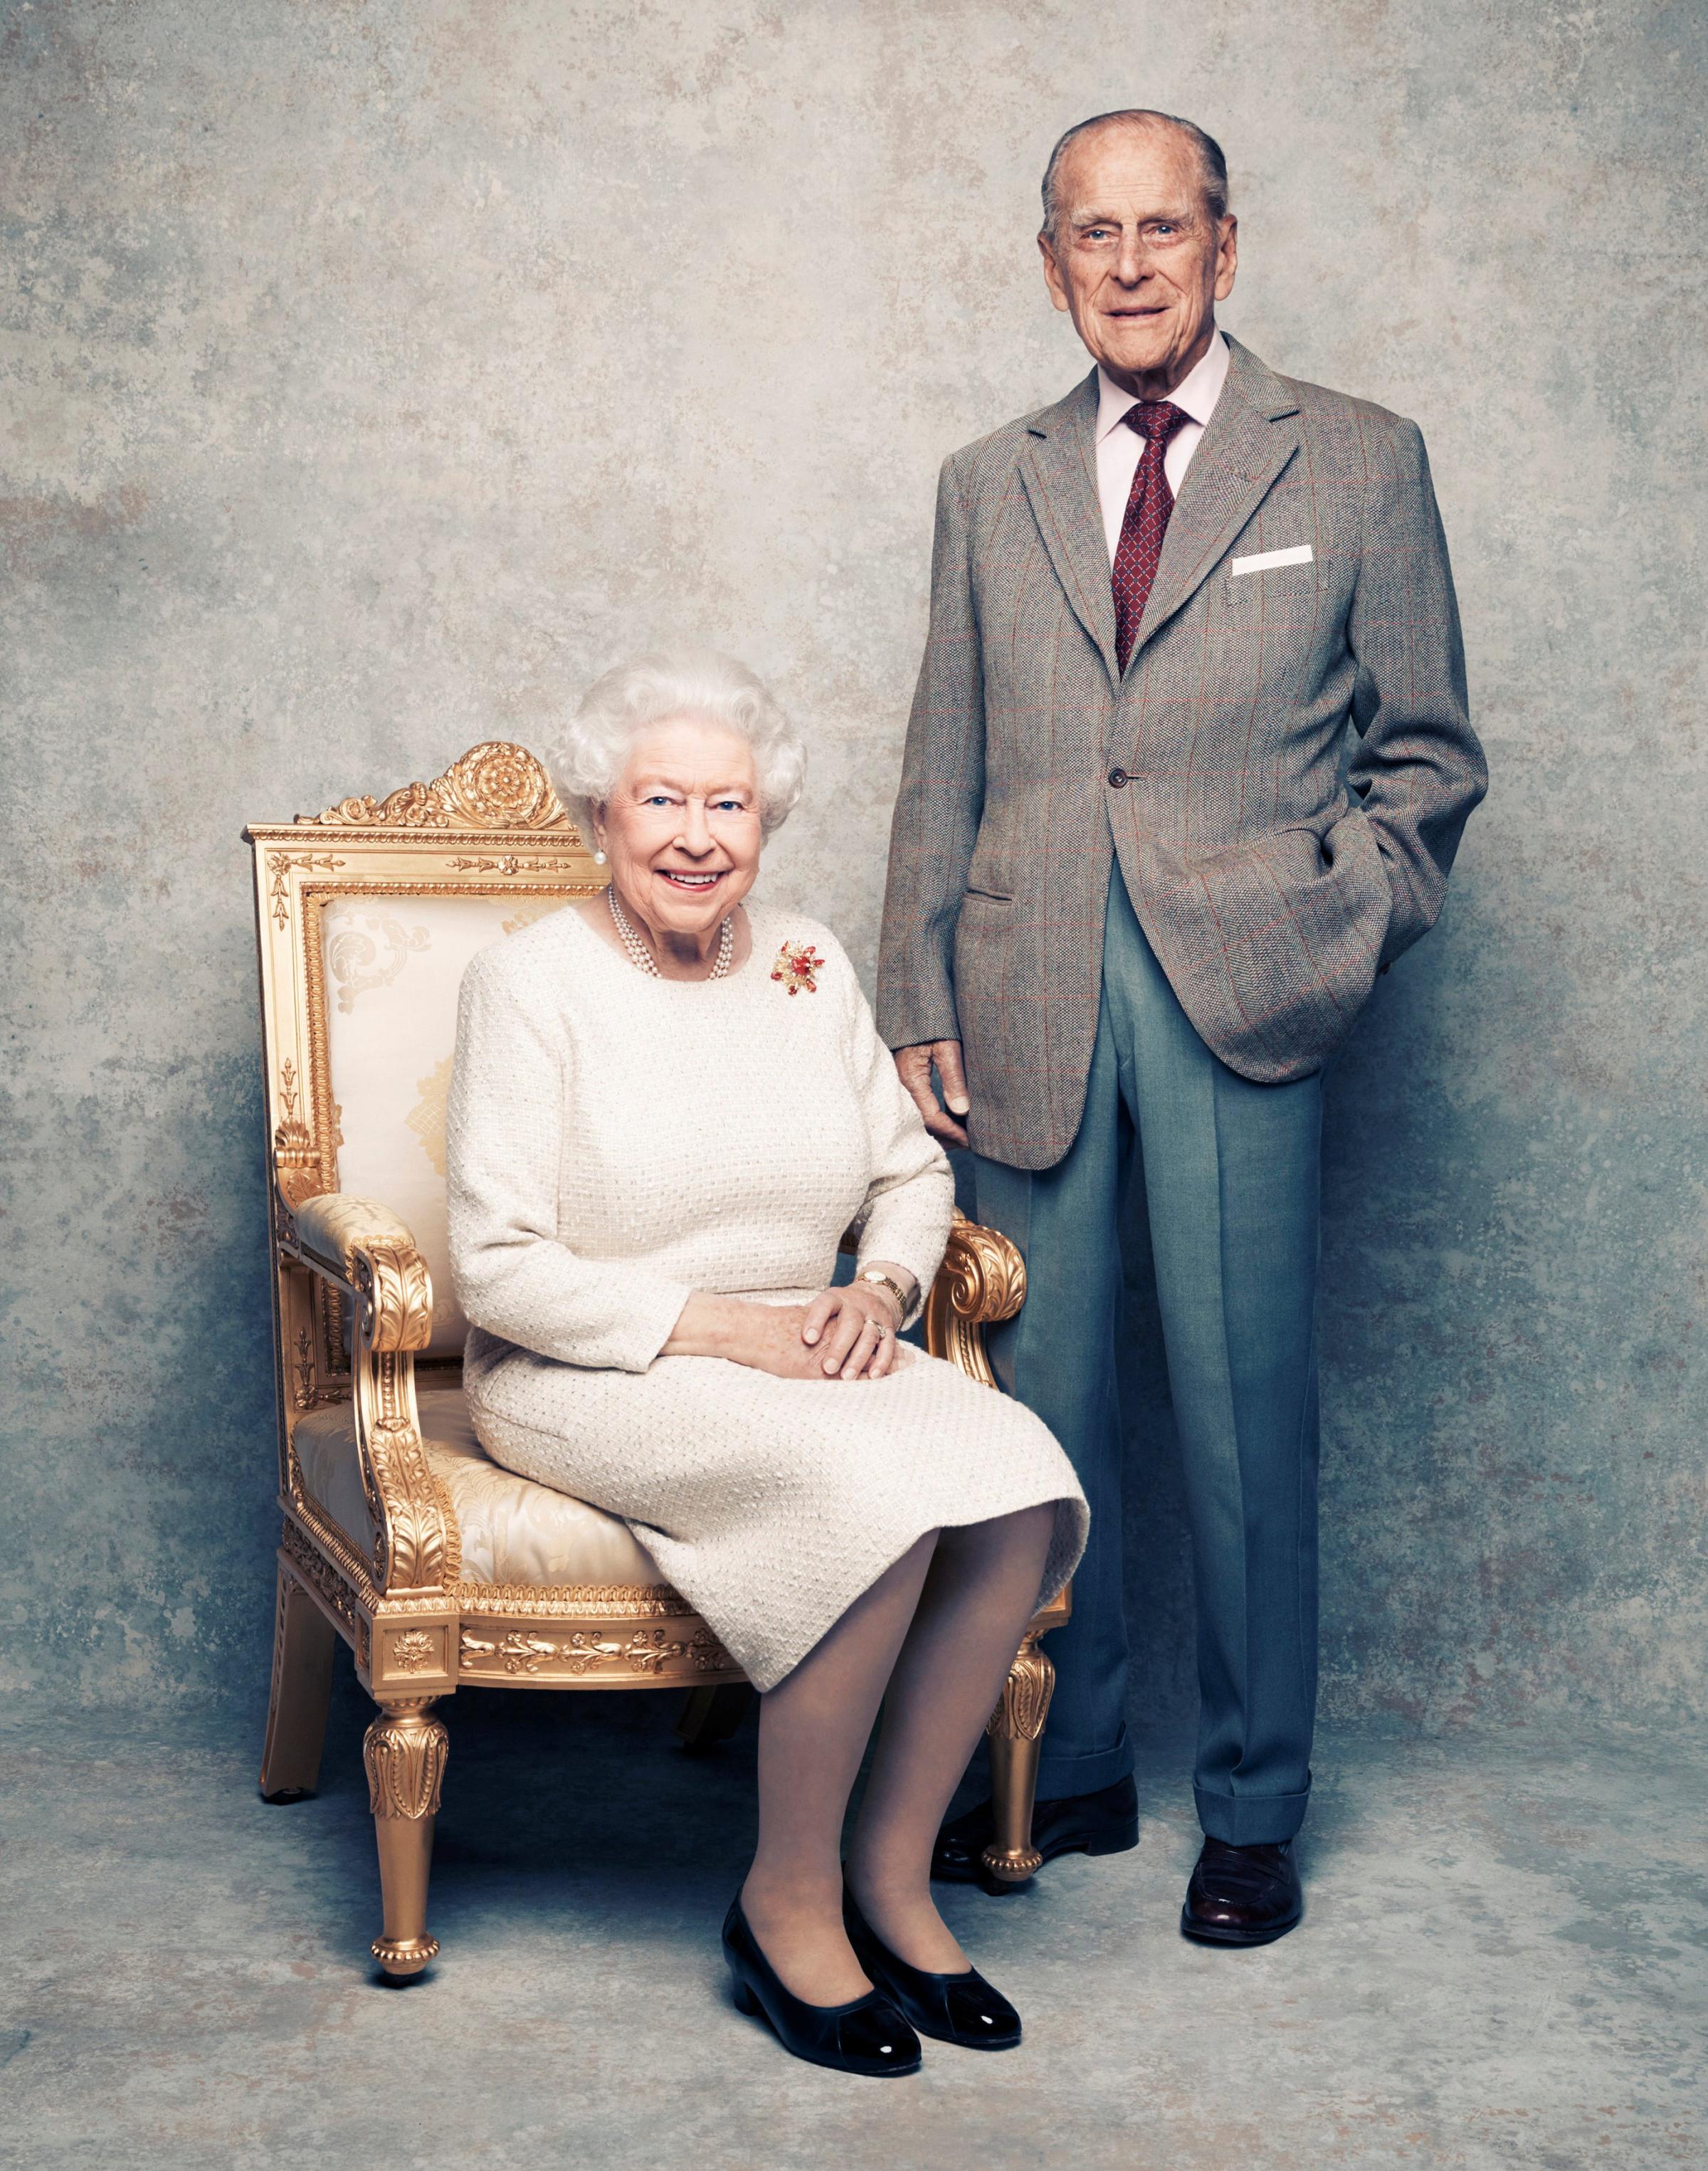 A handout photo shows Britain's Queen Elizabeth and Prince Philip in the White Drawing Room at Windsor Castle